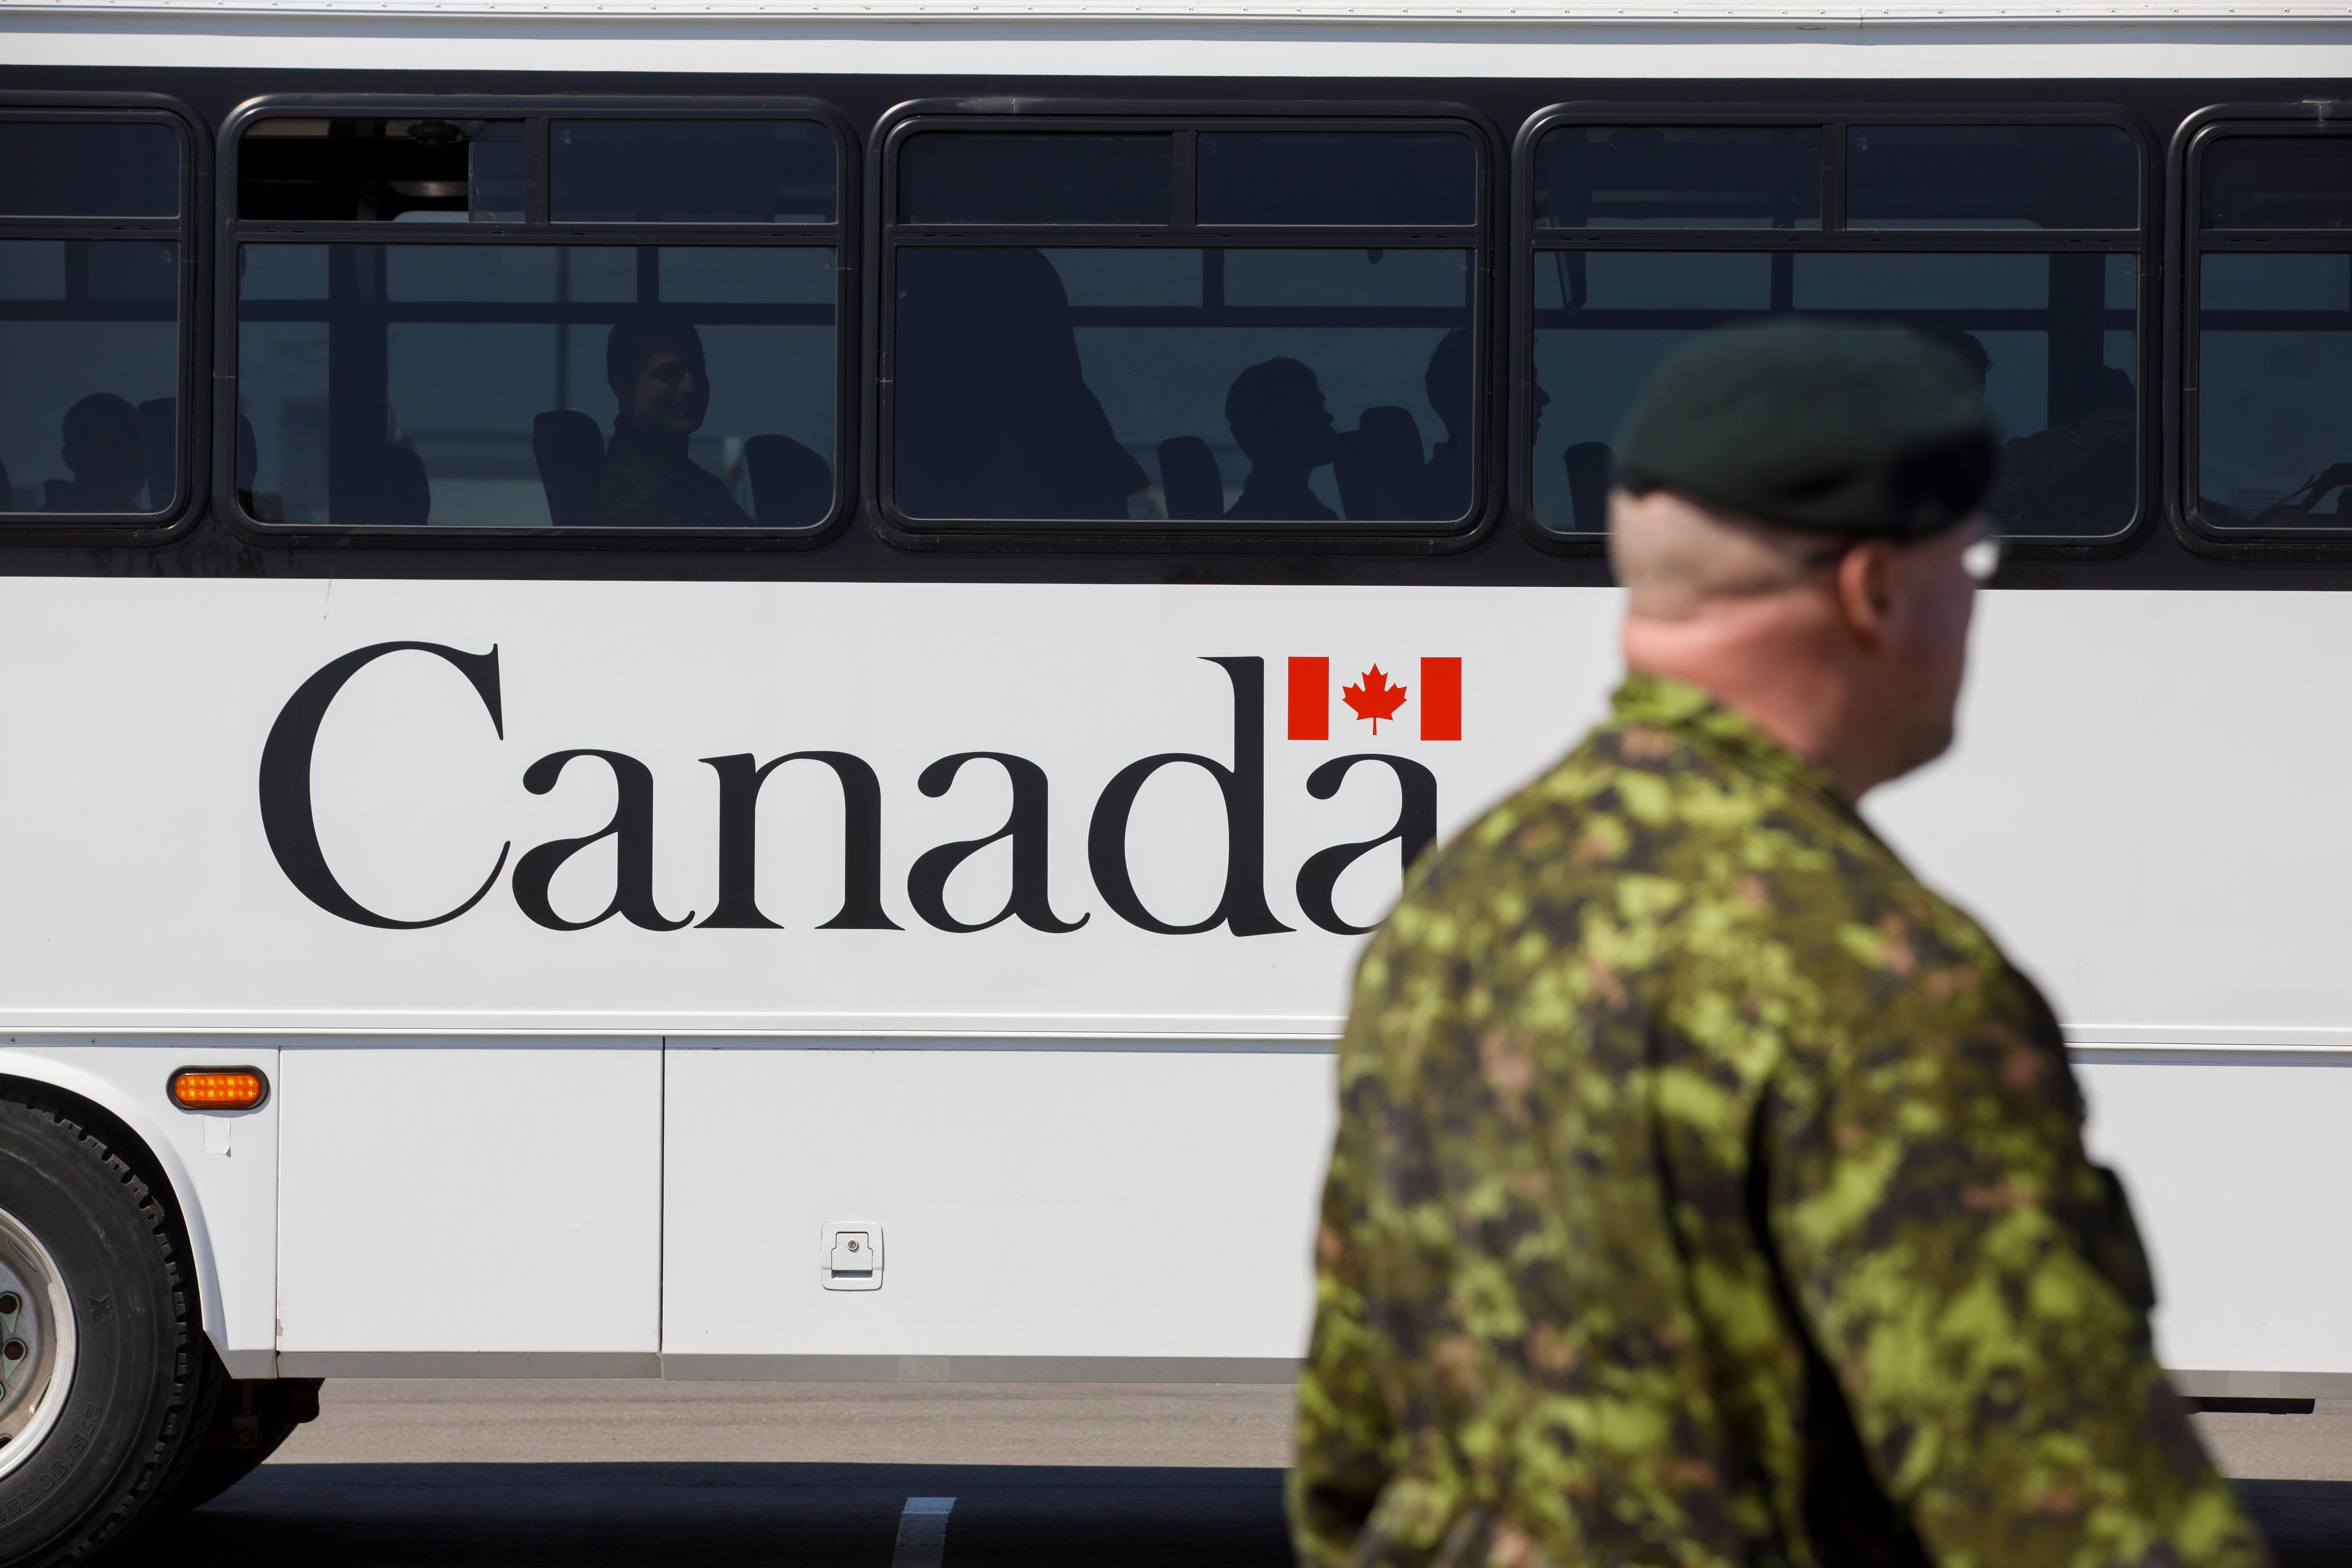 The military in Canada have long struggled with allegations of sexual misconduct and sexism